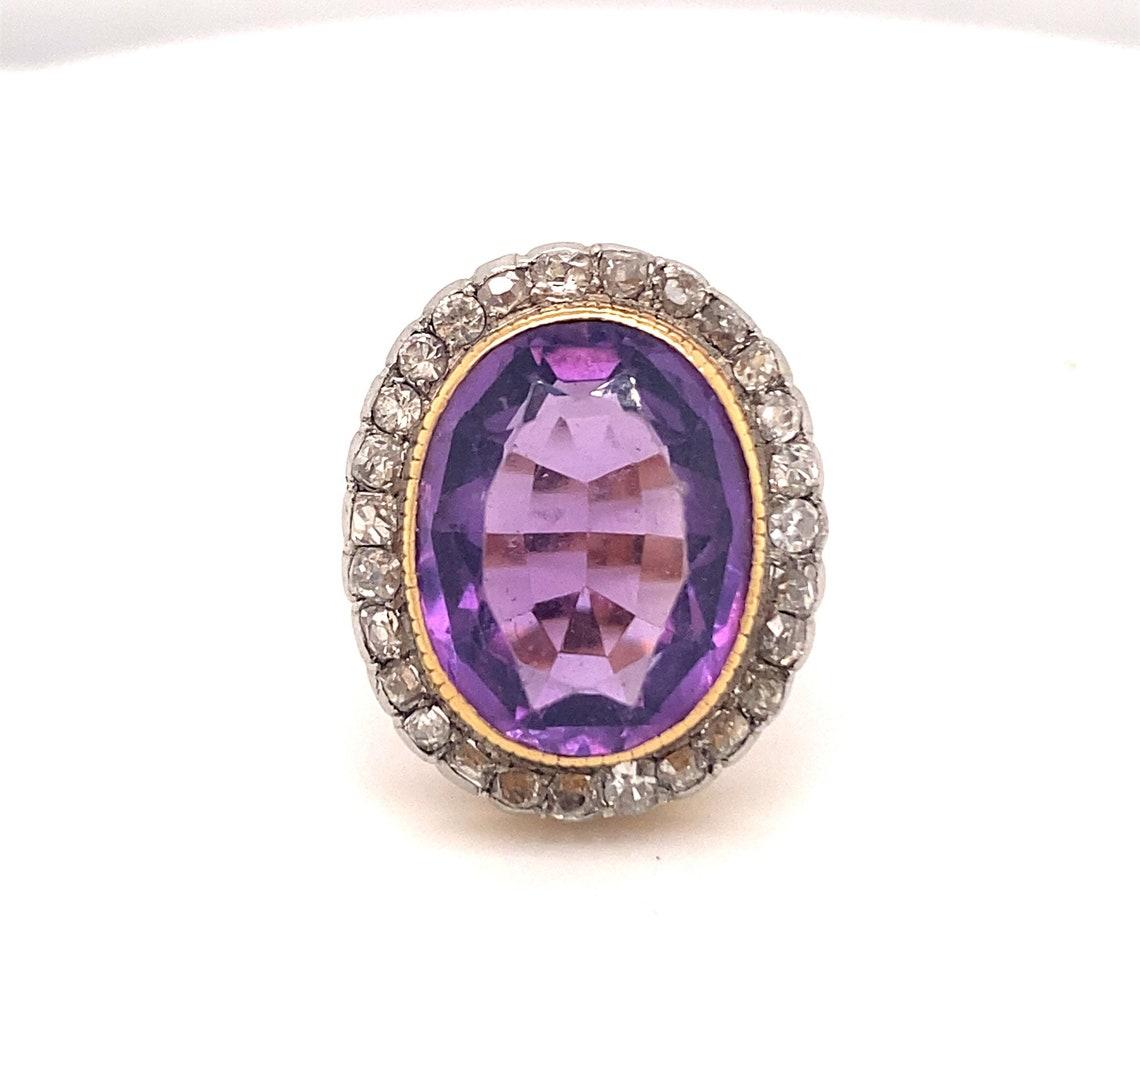 
10 Carat Vintage Amethyst Diamond Ring 18 Karat Yellow Gold with 31 Diamonds 

. This is a beautiful antique Edwardian 10 carat amethyst diamond ring. The ring is set with 28 old mine cut diamonds . The diamonds average I color IS-1 clarity with a